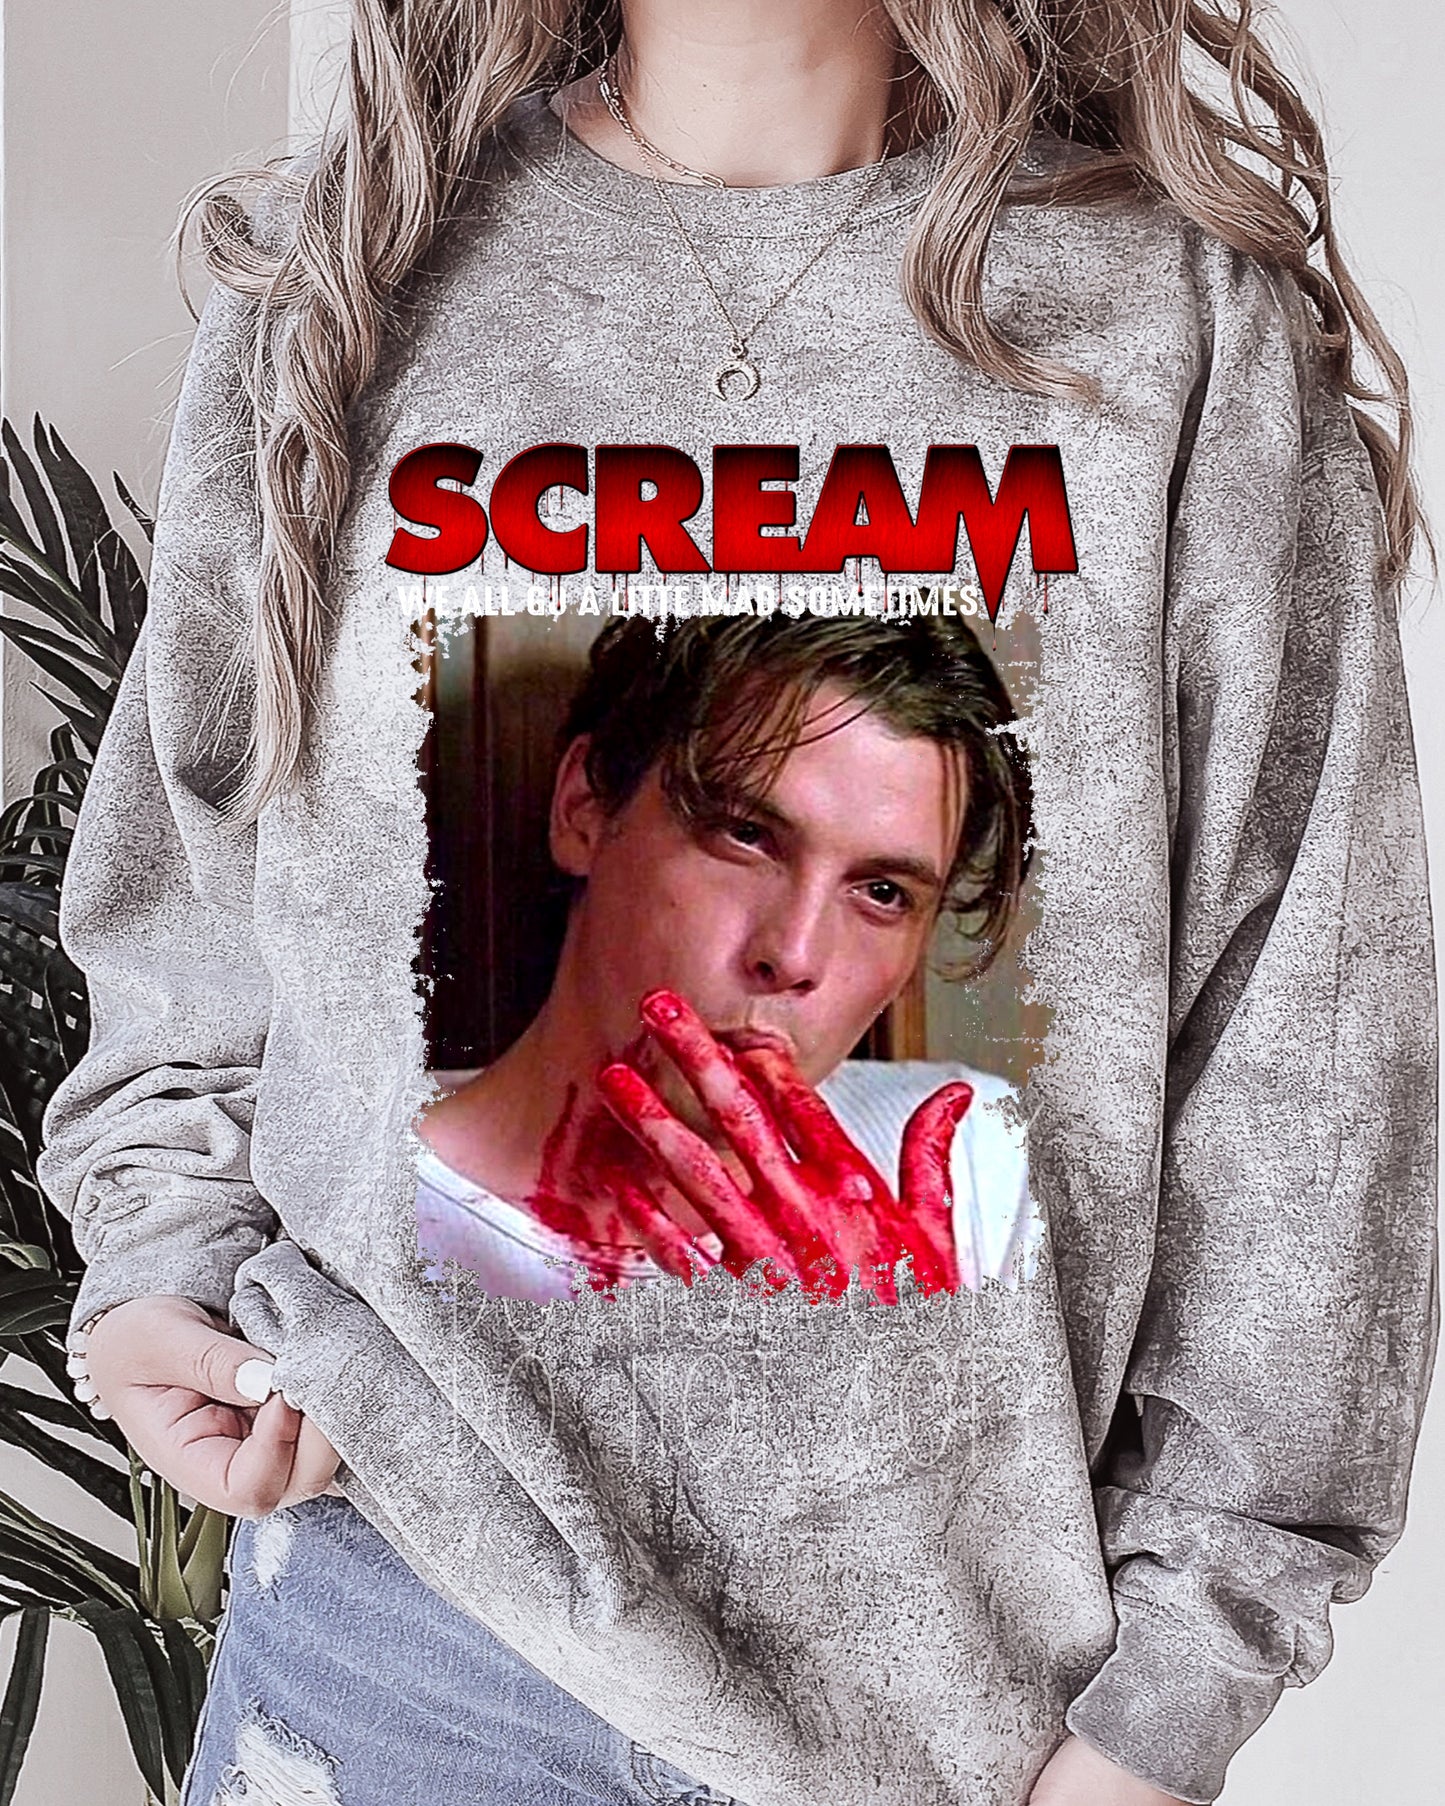 Scream We All Go a Little Mad Billy Bloody Fingers Direct to Film Transfer